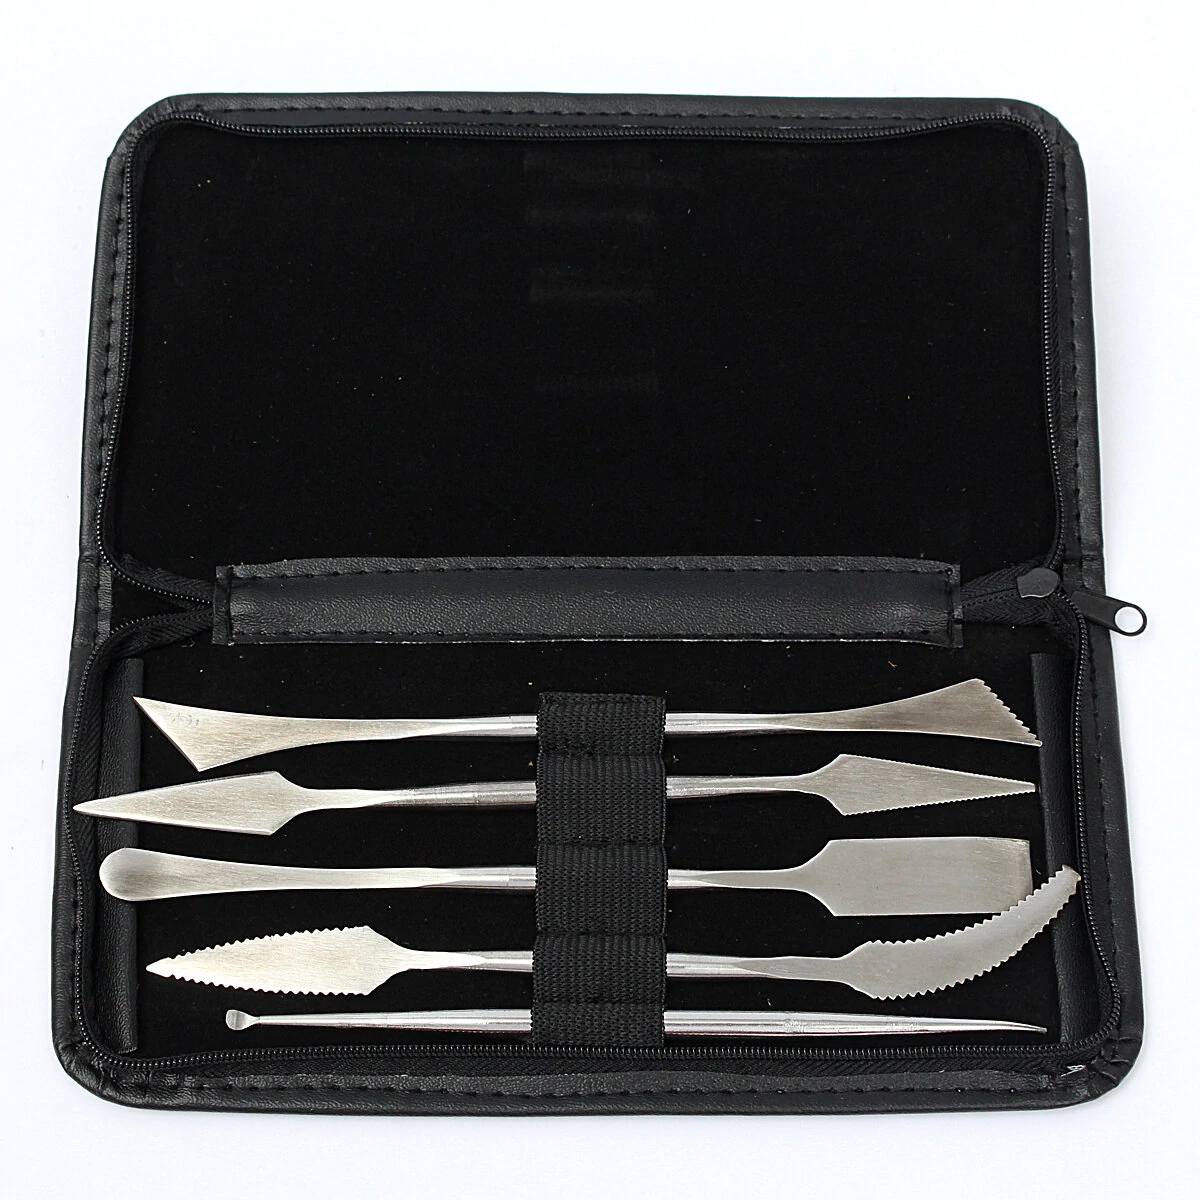 5pcs/set clay scrapers stainless steel clay sculpting tools carving pottery tools artist supplies